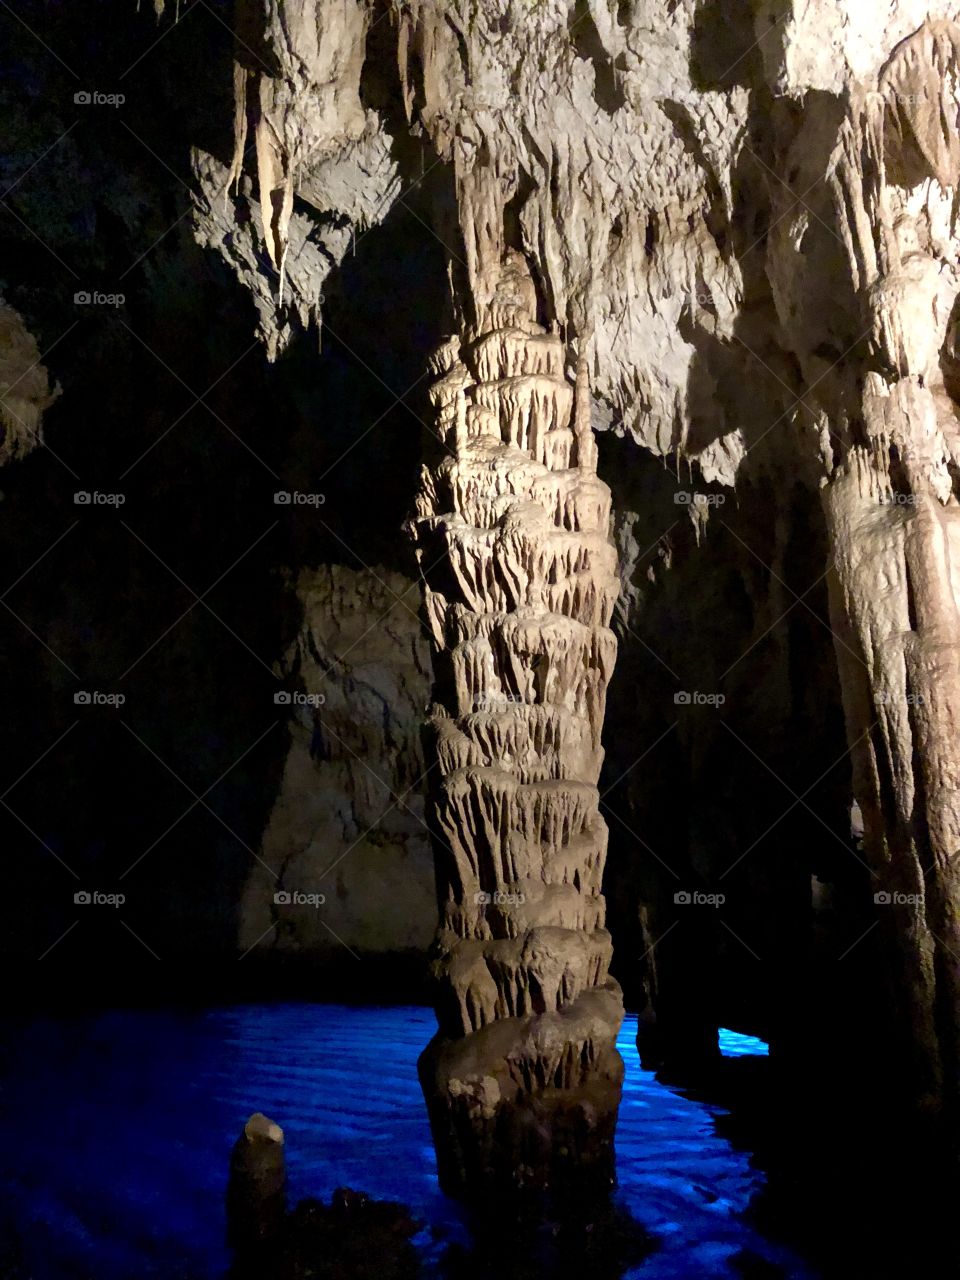 The tower of Pisa in emerald grotto 